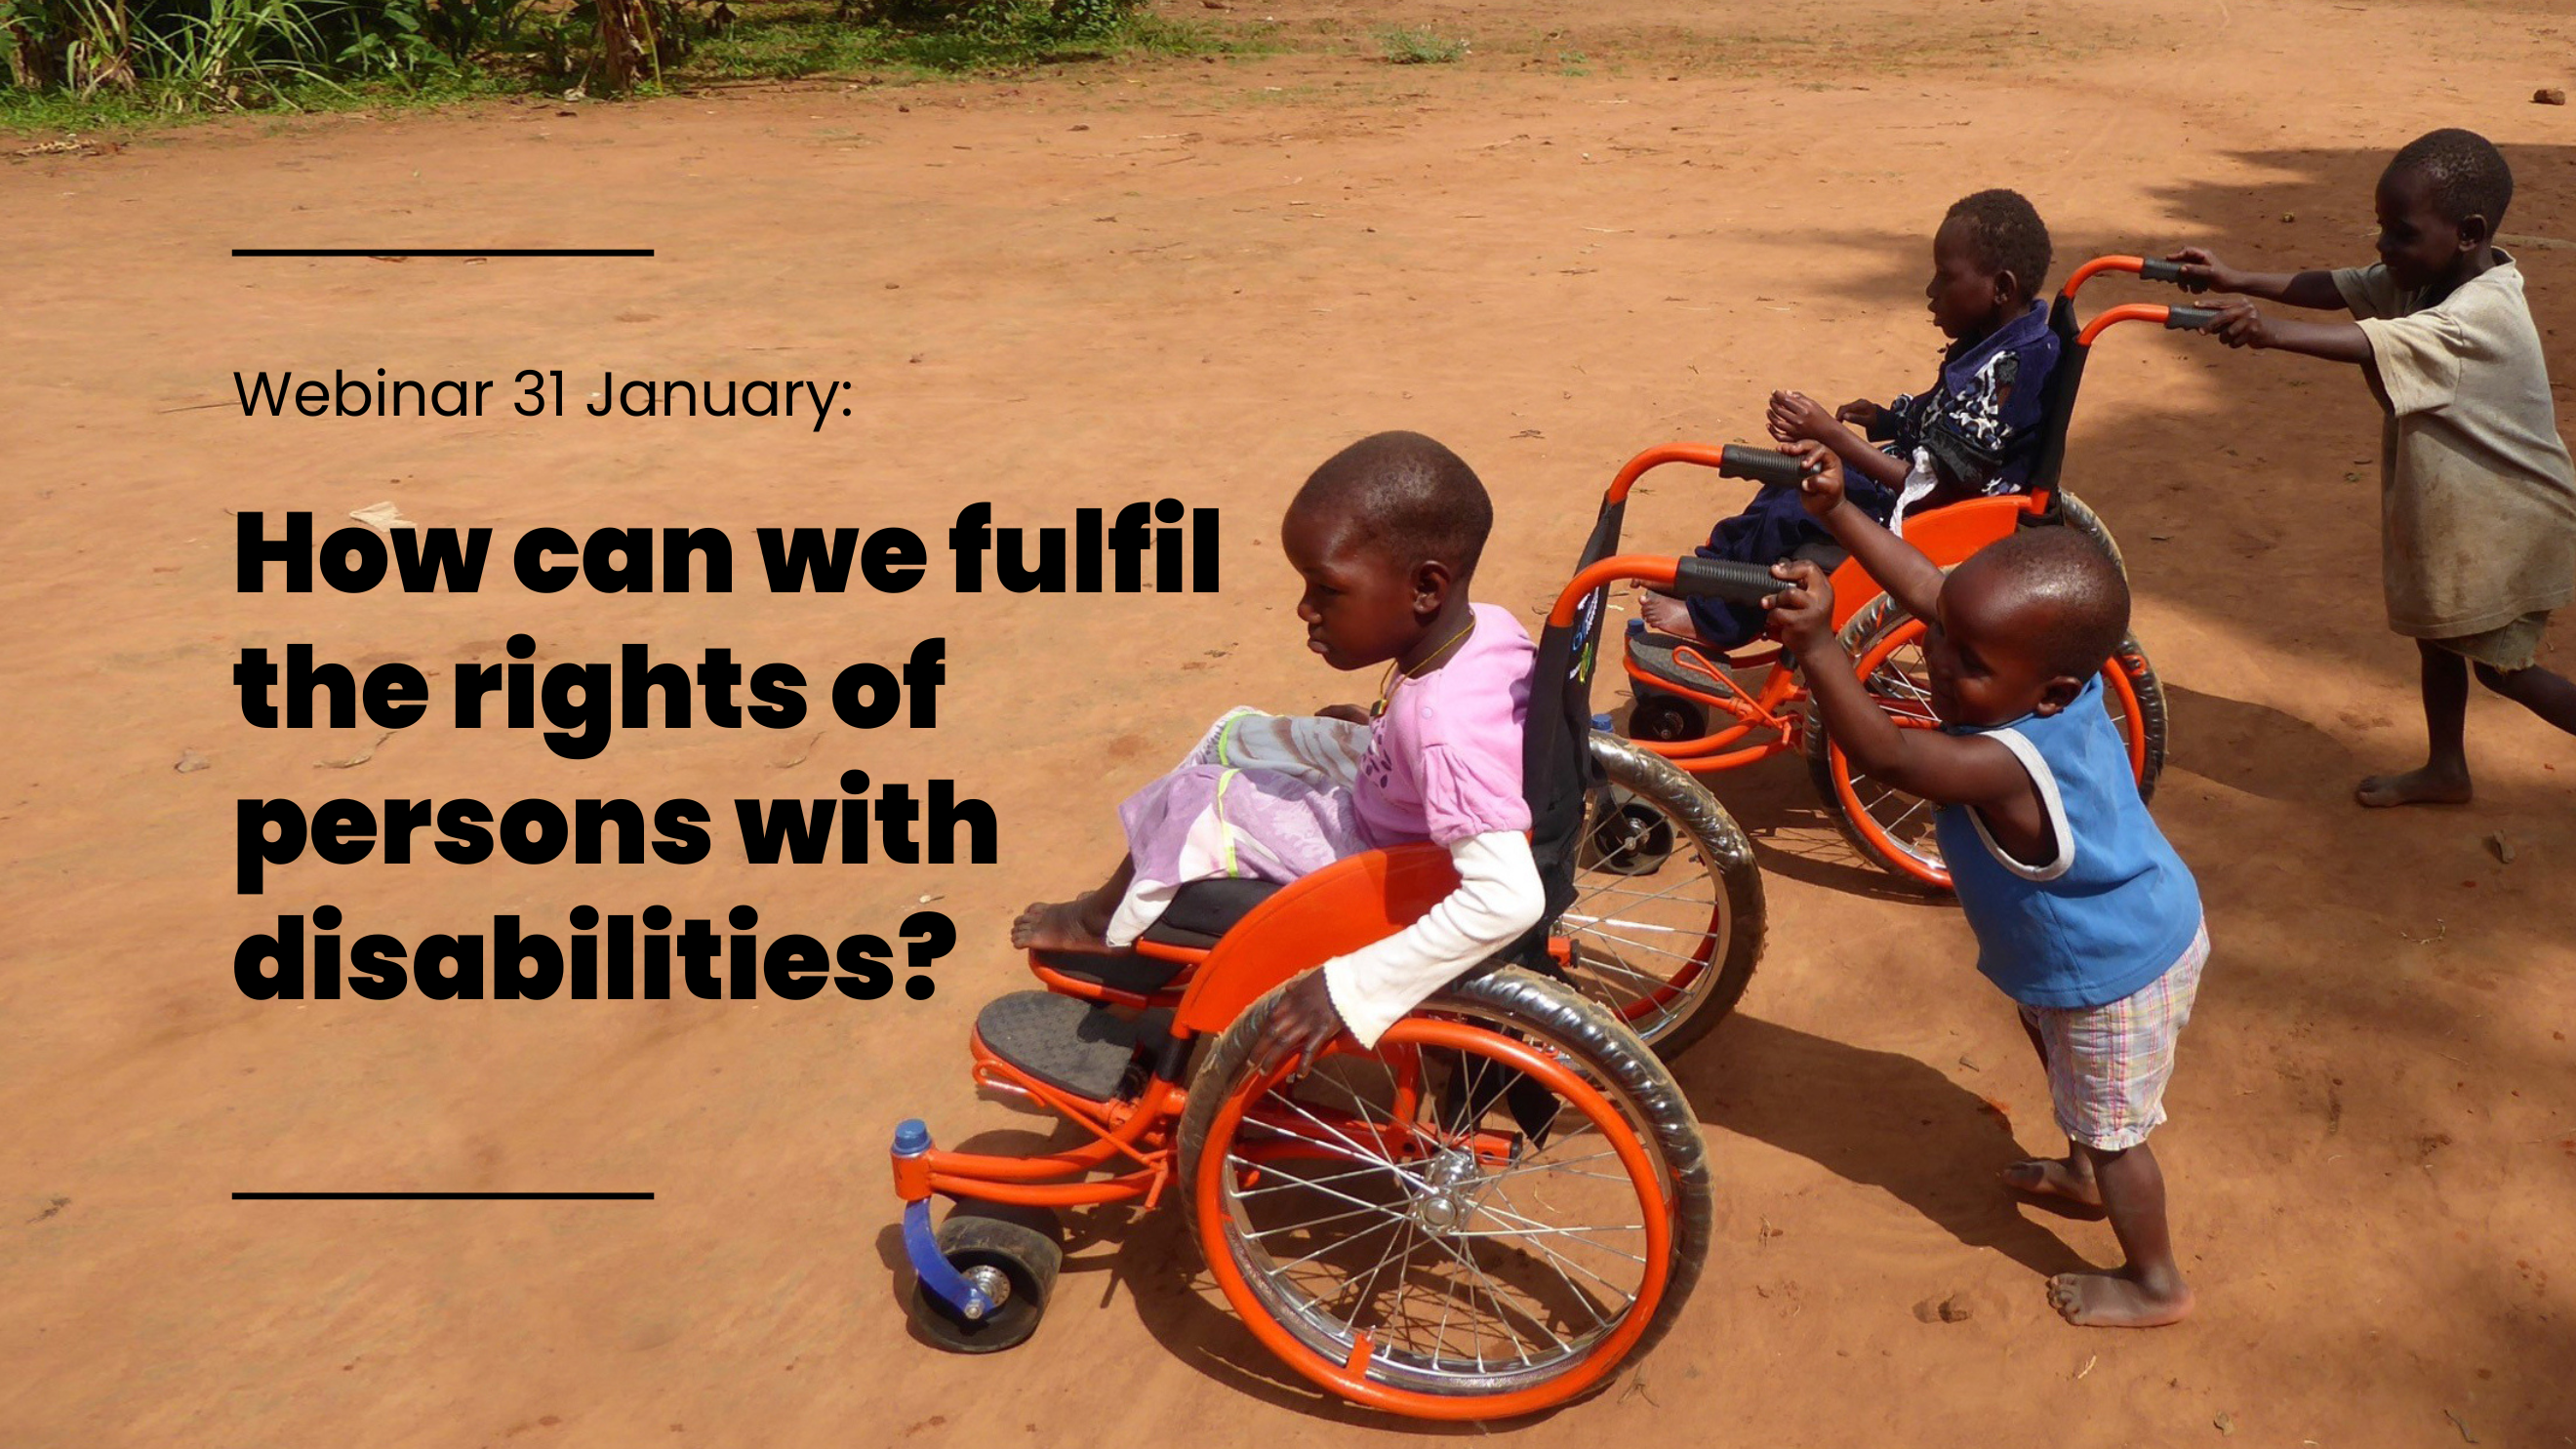 Four children on a road in Africa. Two children sit in wheelchairs. Two other children drive the wheelchairs.